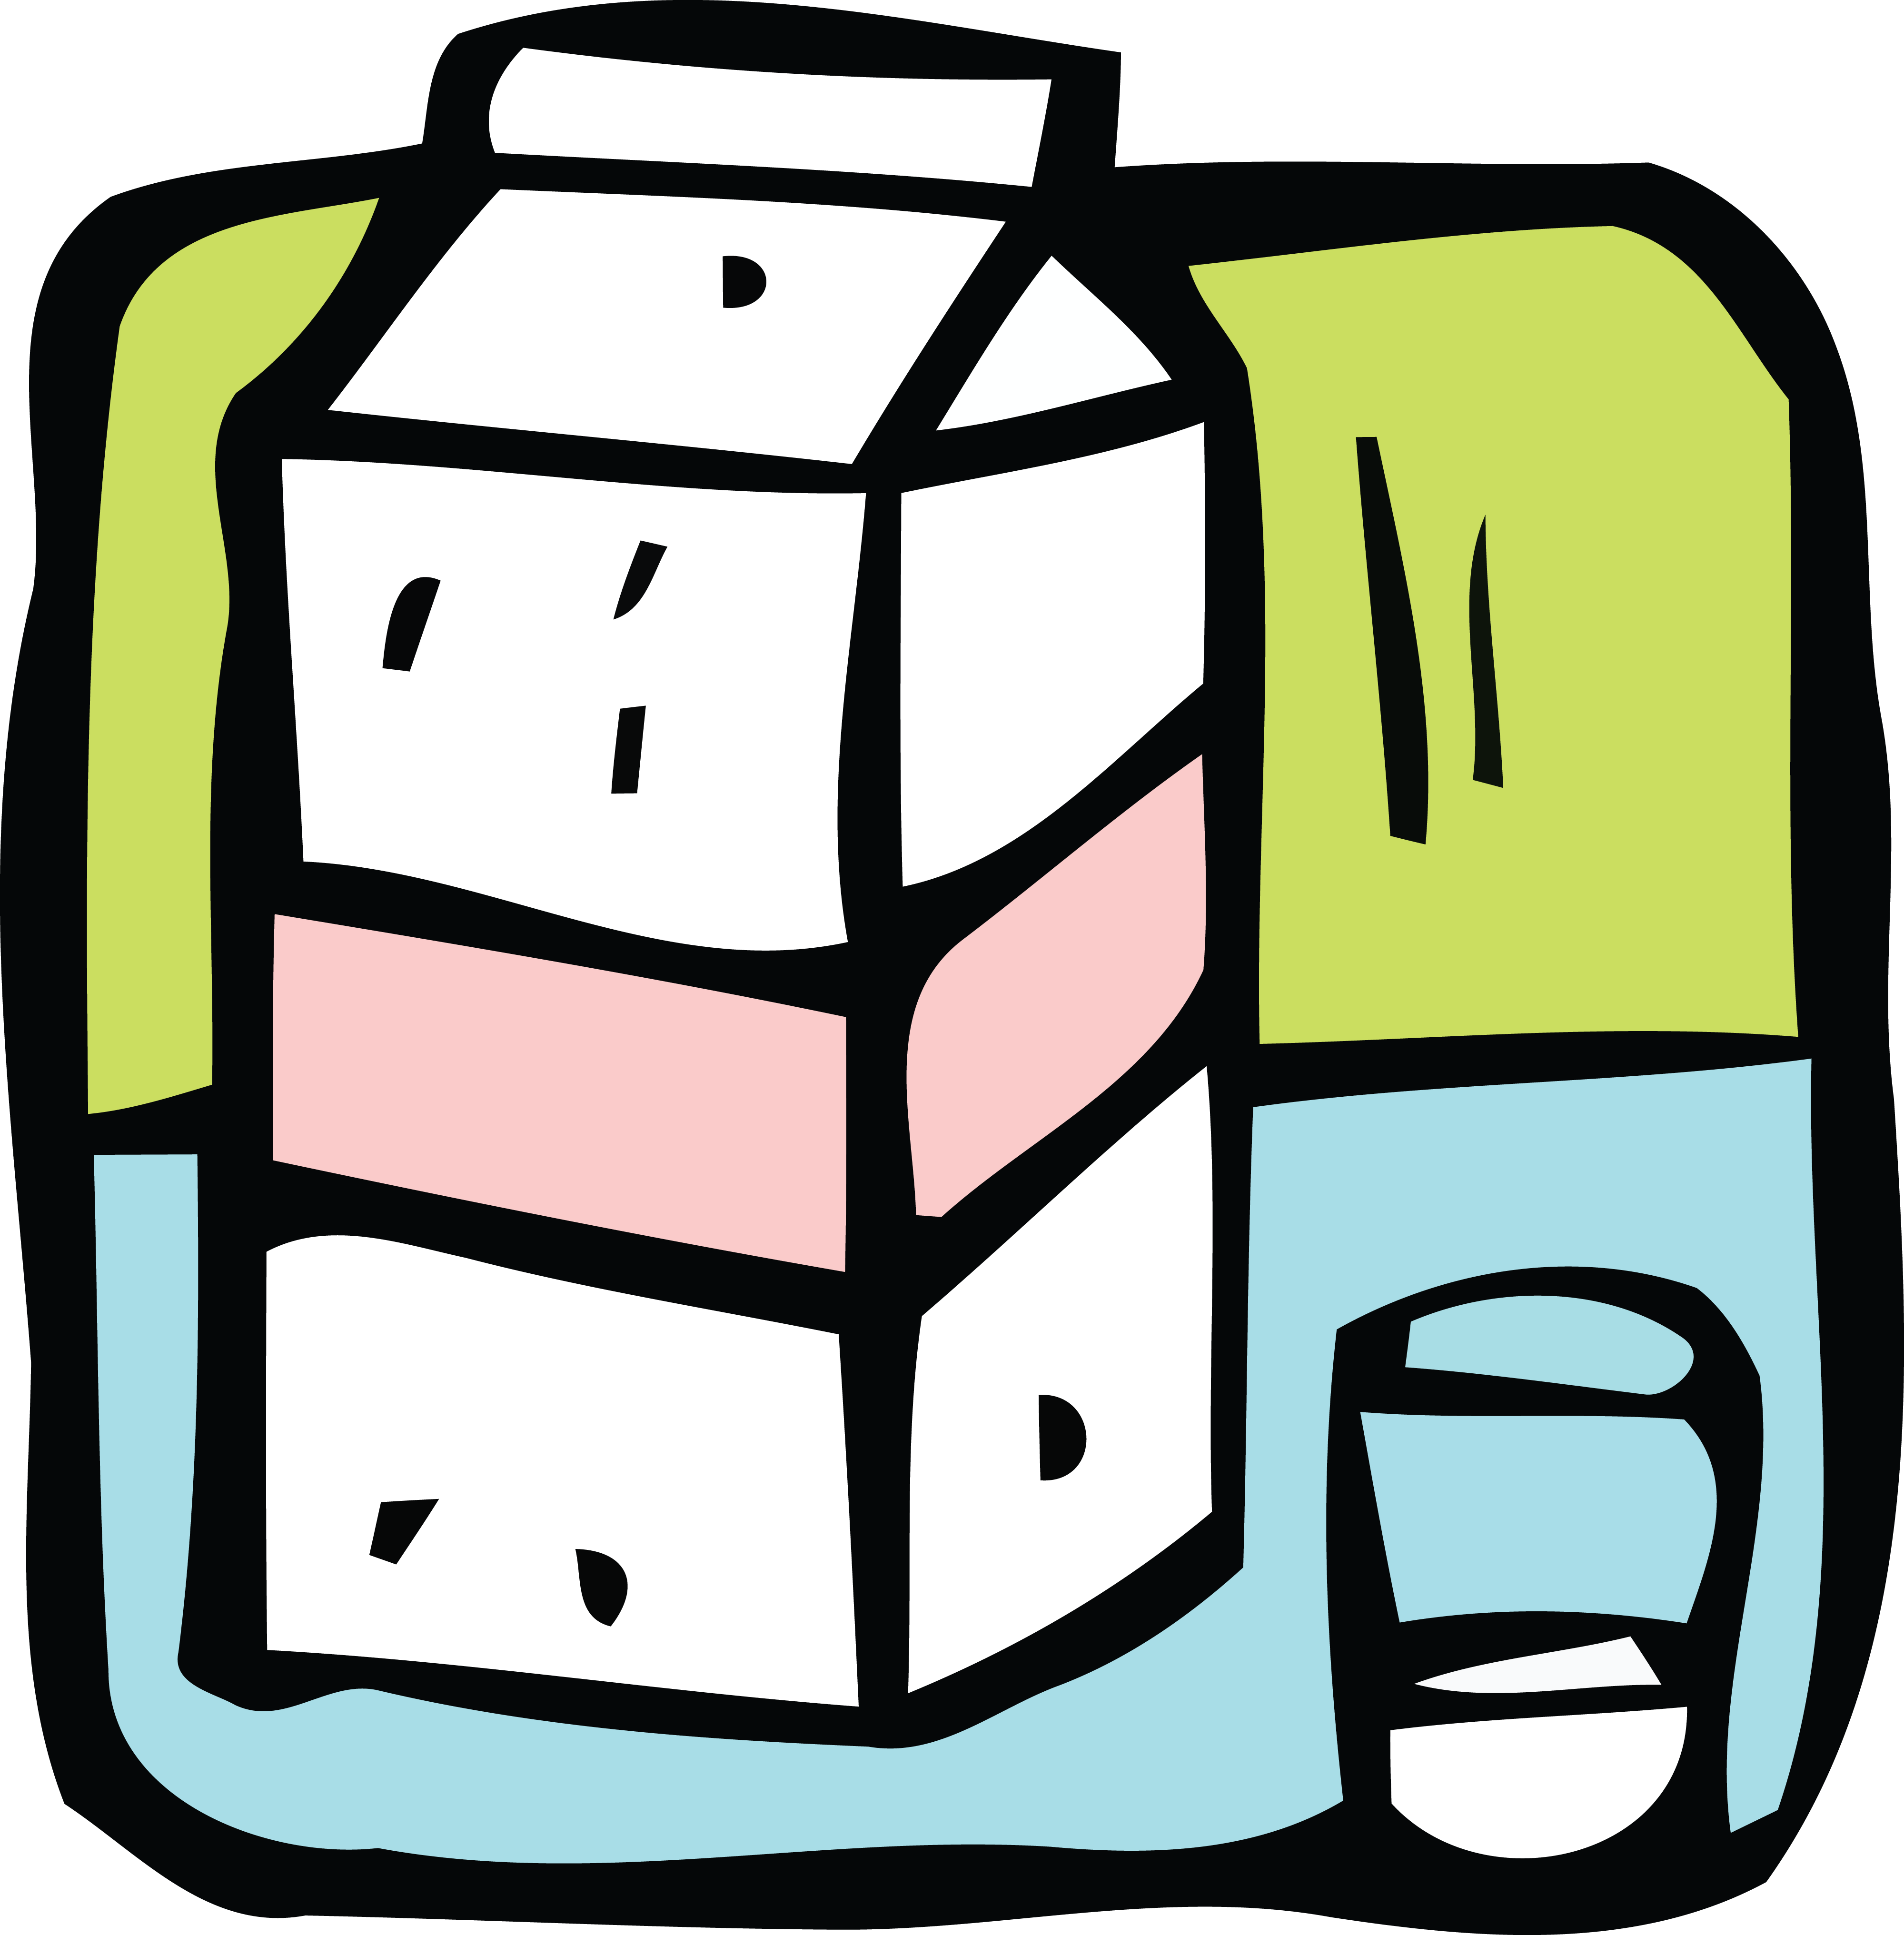 Free Clipart Of Milk - My Calorie Counting Journal: Calorie Counting Tracker (4000x4065)